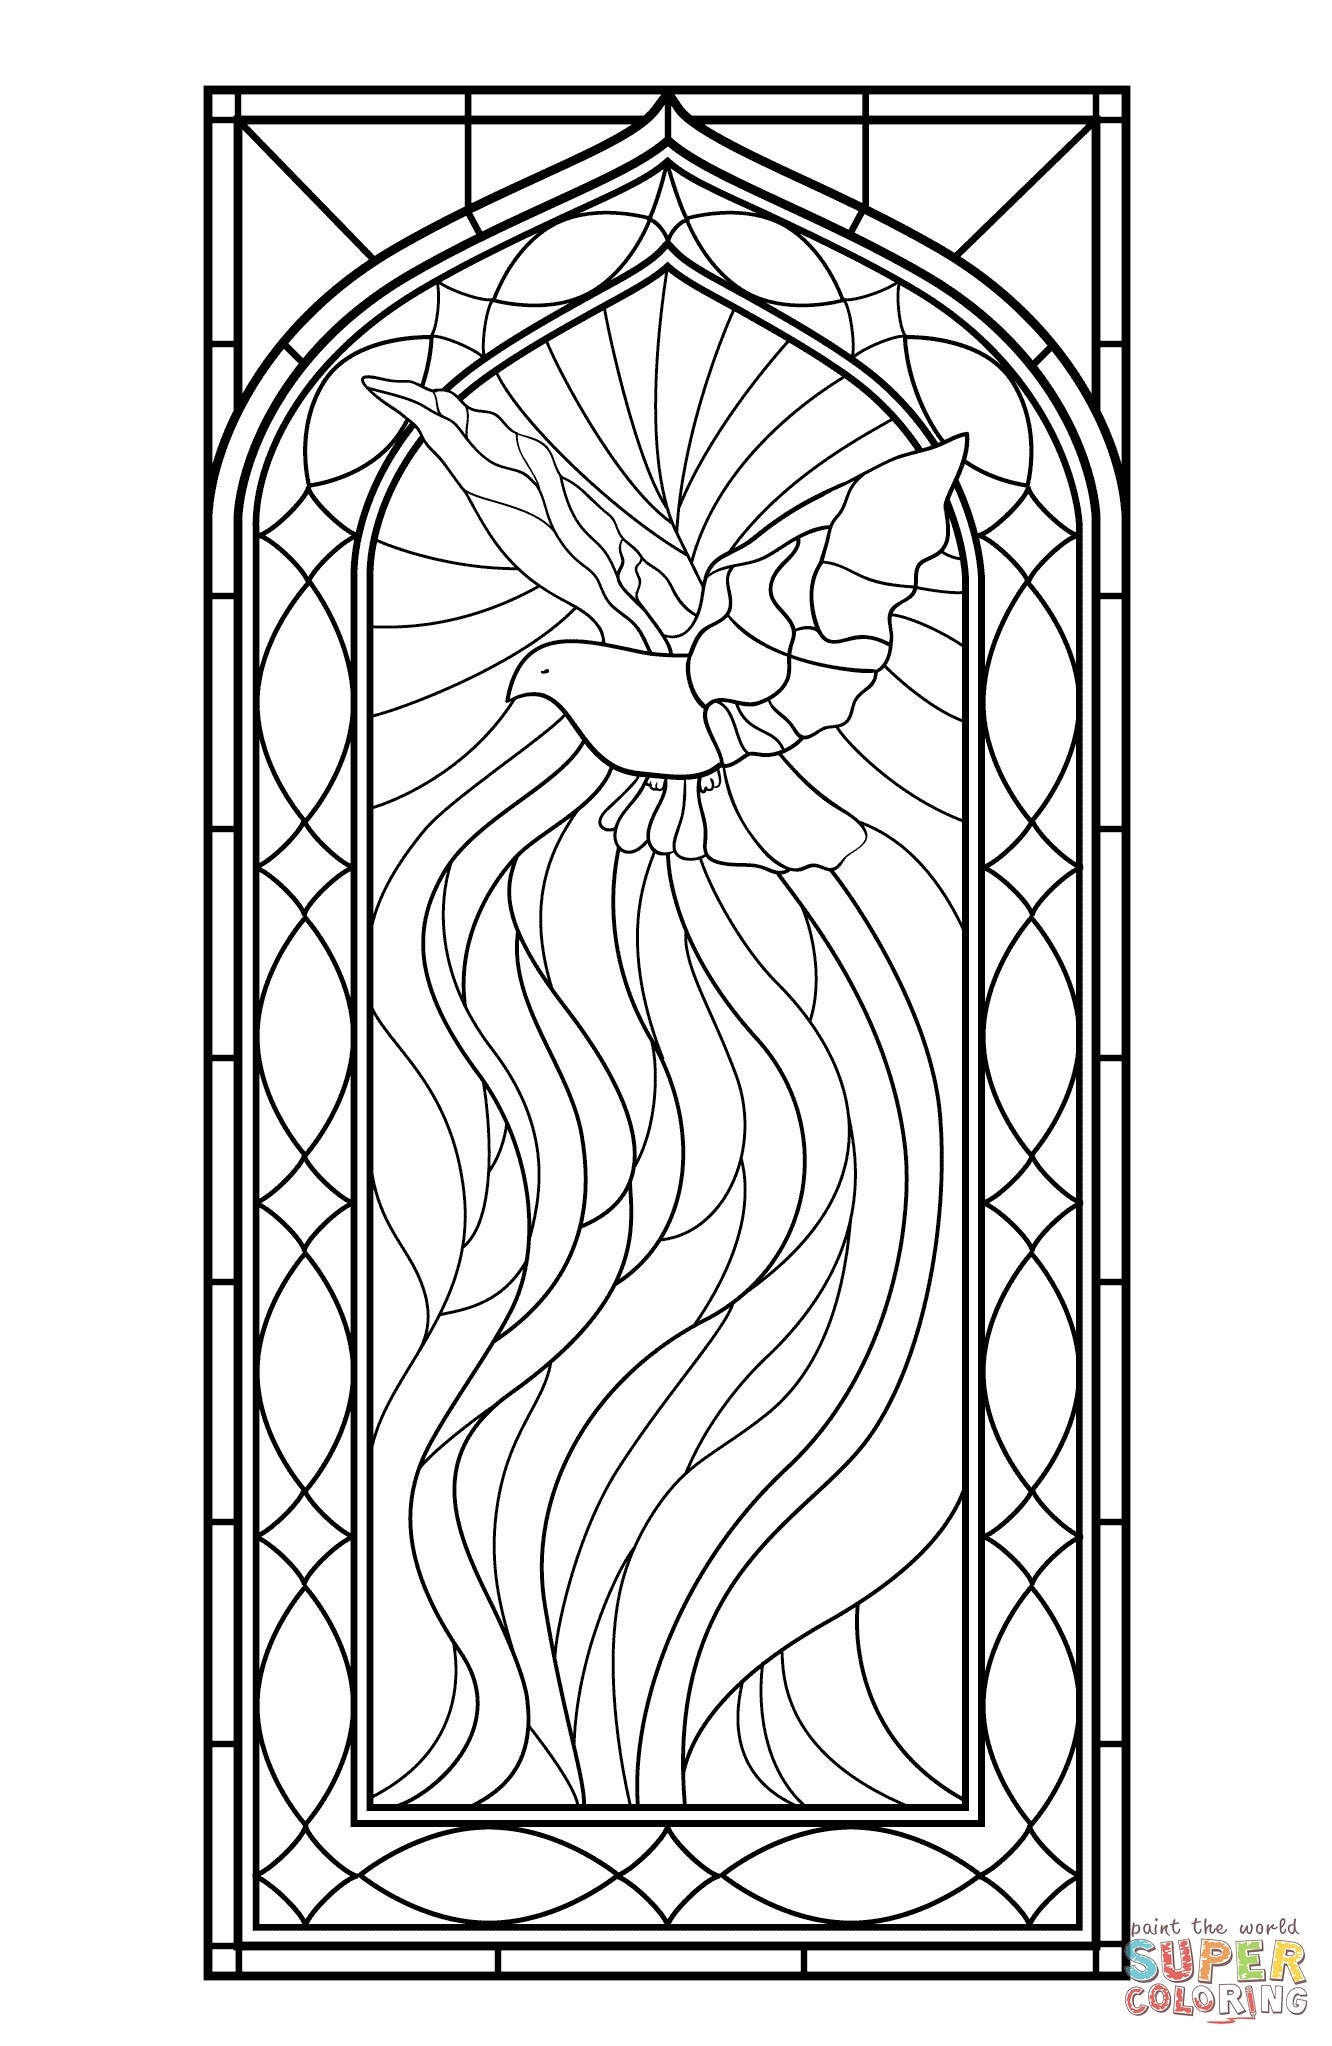 Free Printable Stain Glass Patterns Inspirational Best Collection Of - Free Printable Stained Glass Patterns